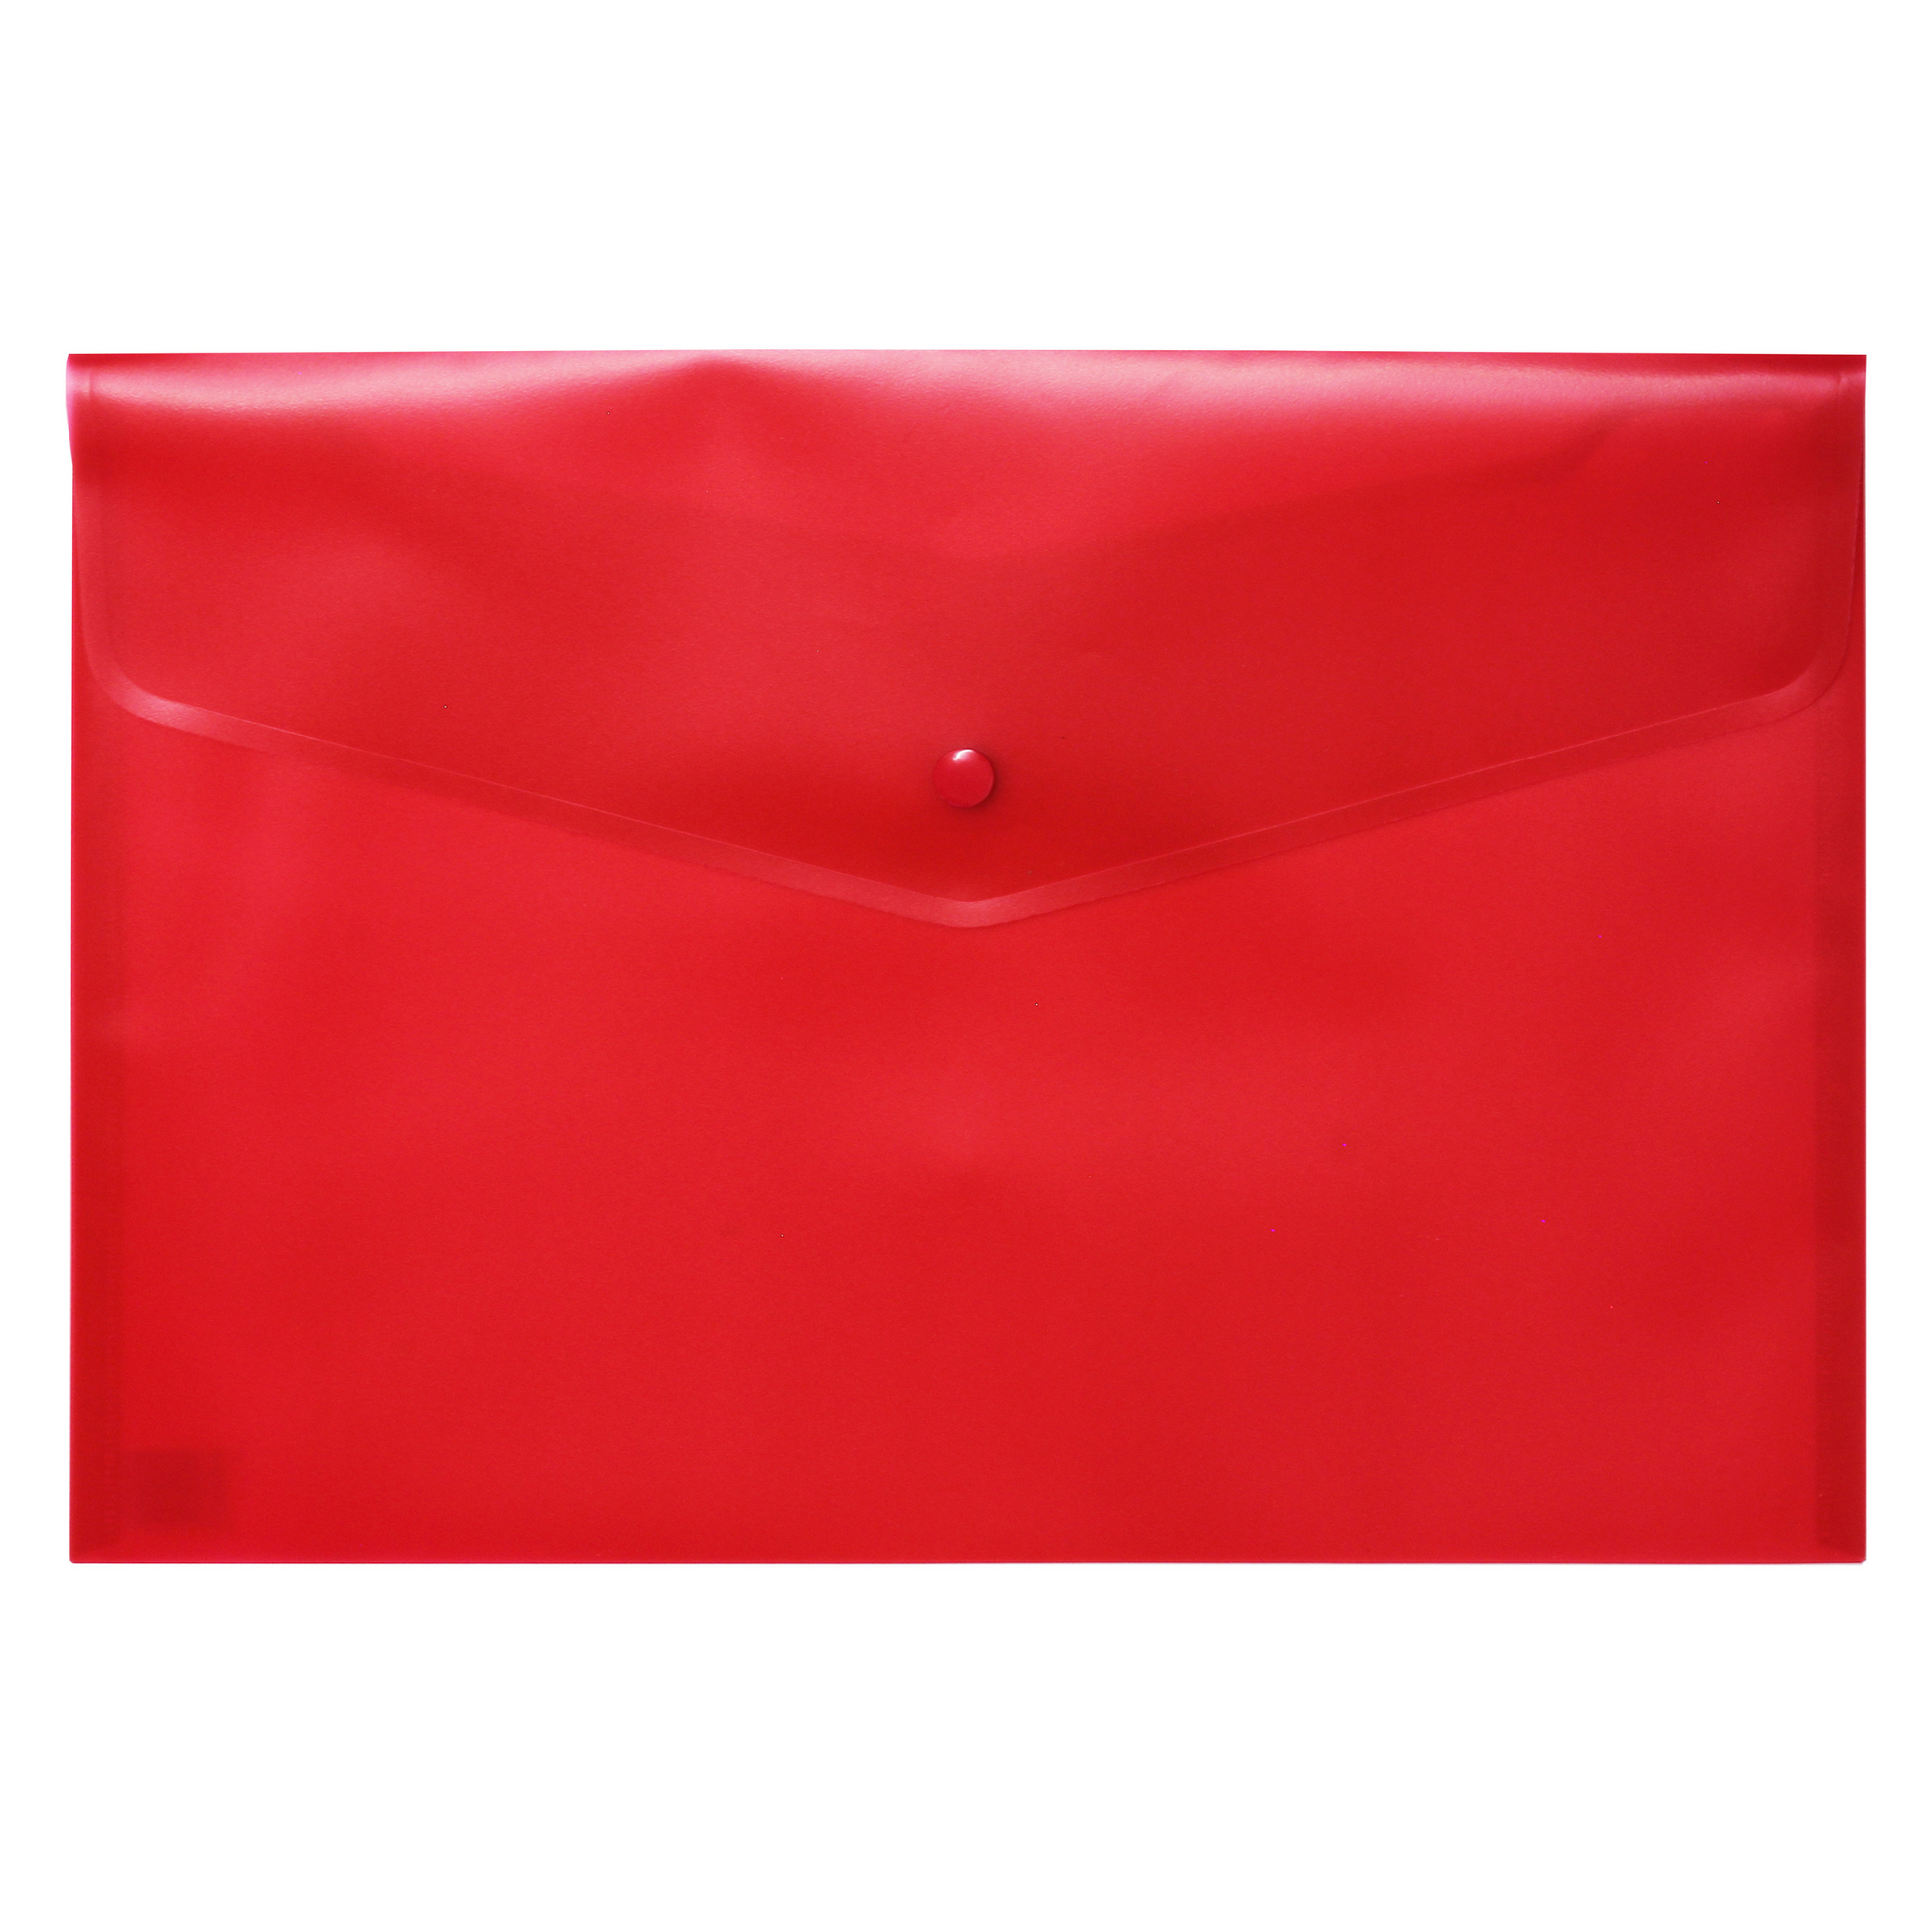 Vibrant red A4-sized plastic stud wallet with a snap-button closure, displayed against a white background.